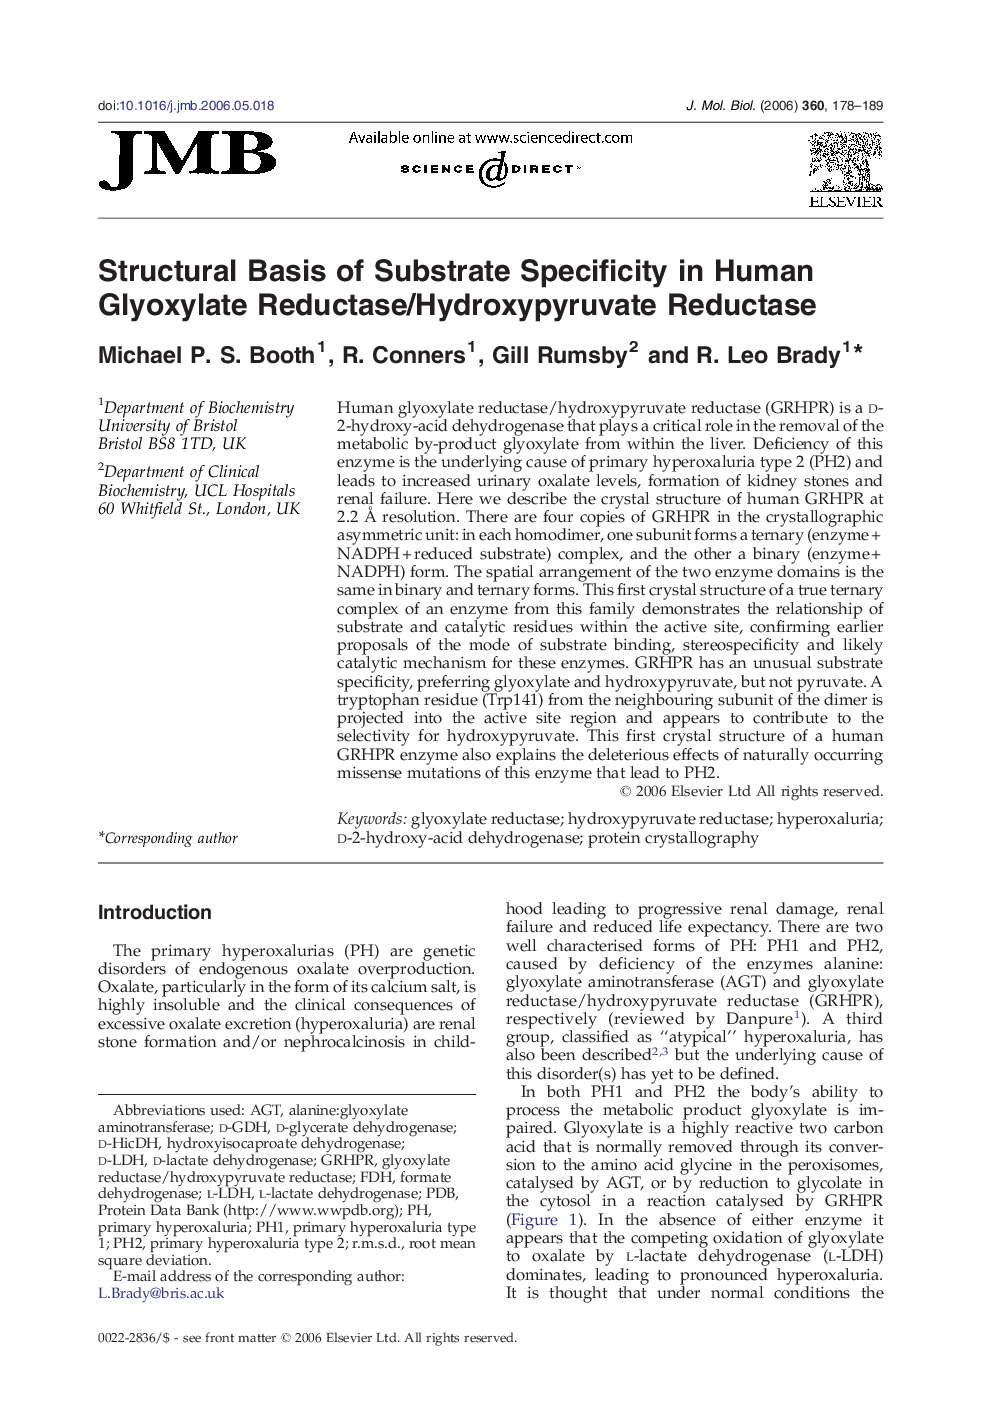 Structural Basis of Substrate Specificity in Human Glyoxylate Reductase/Hydroxypyruvate Reductase